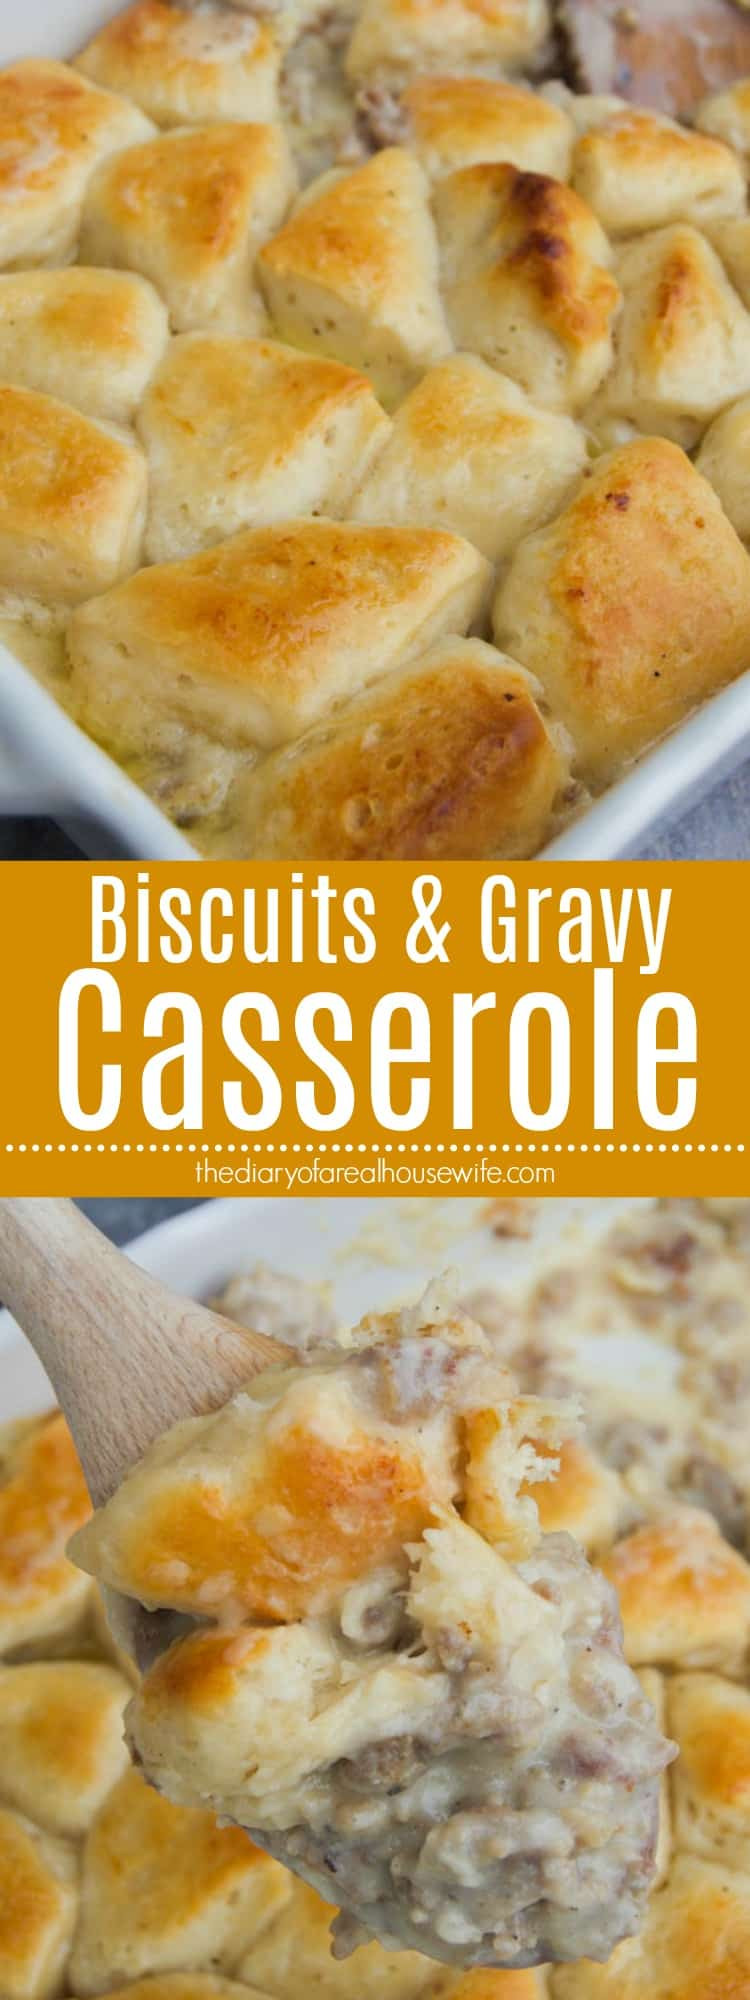 Biscuit And Gravy Casserole Recipe
 Biscuits and Gravy Casserole • The Diary of a Real Housewife